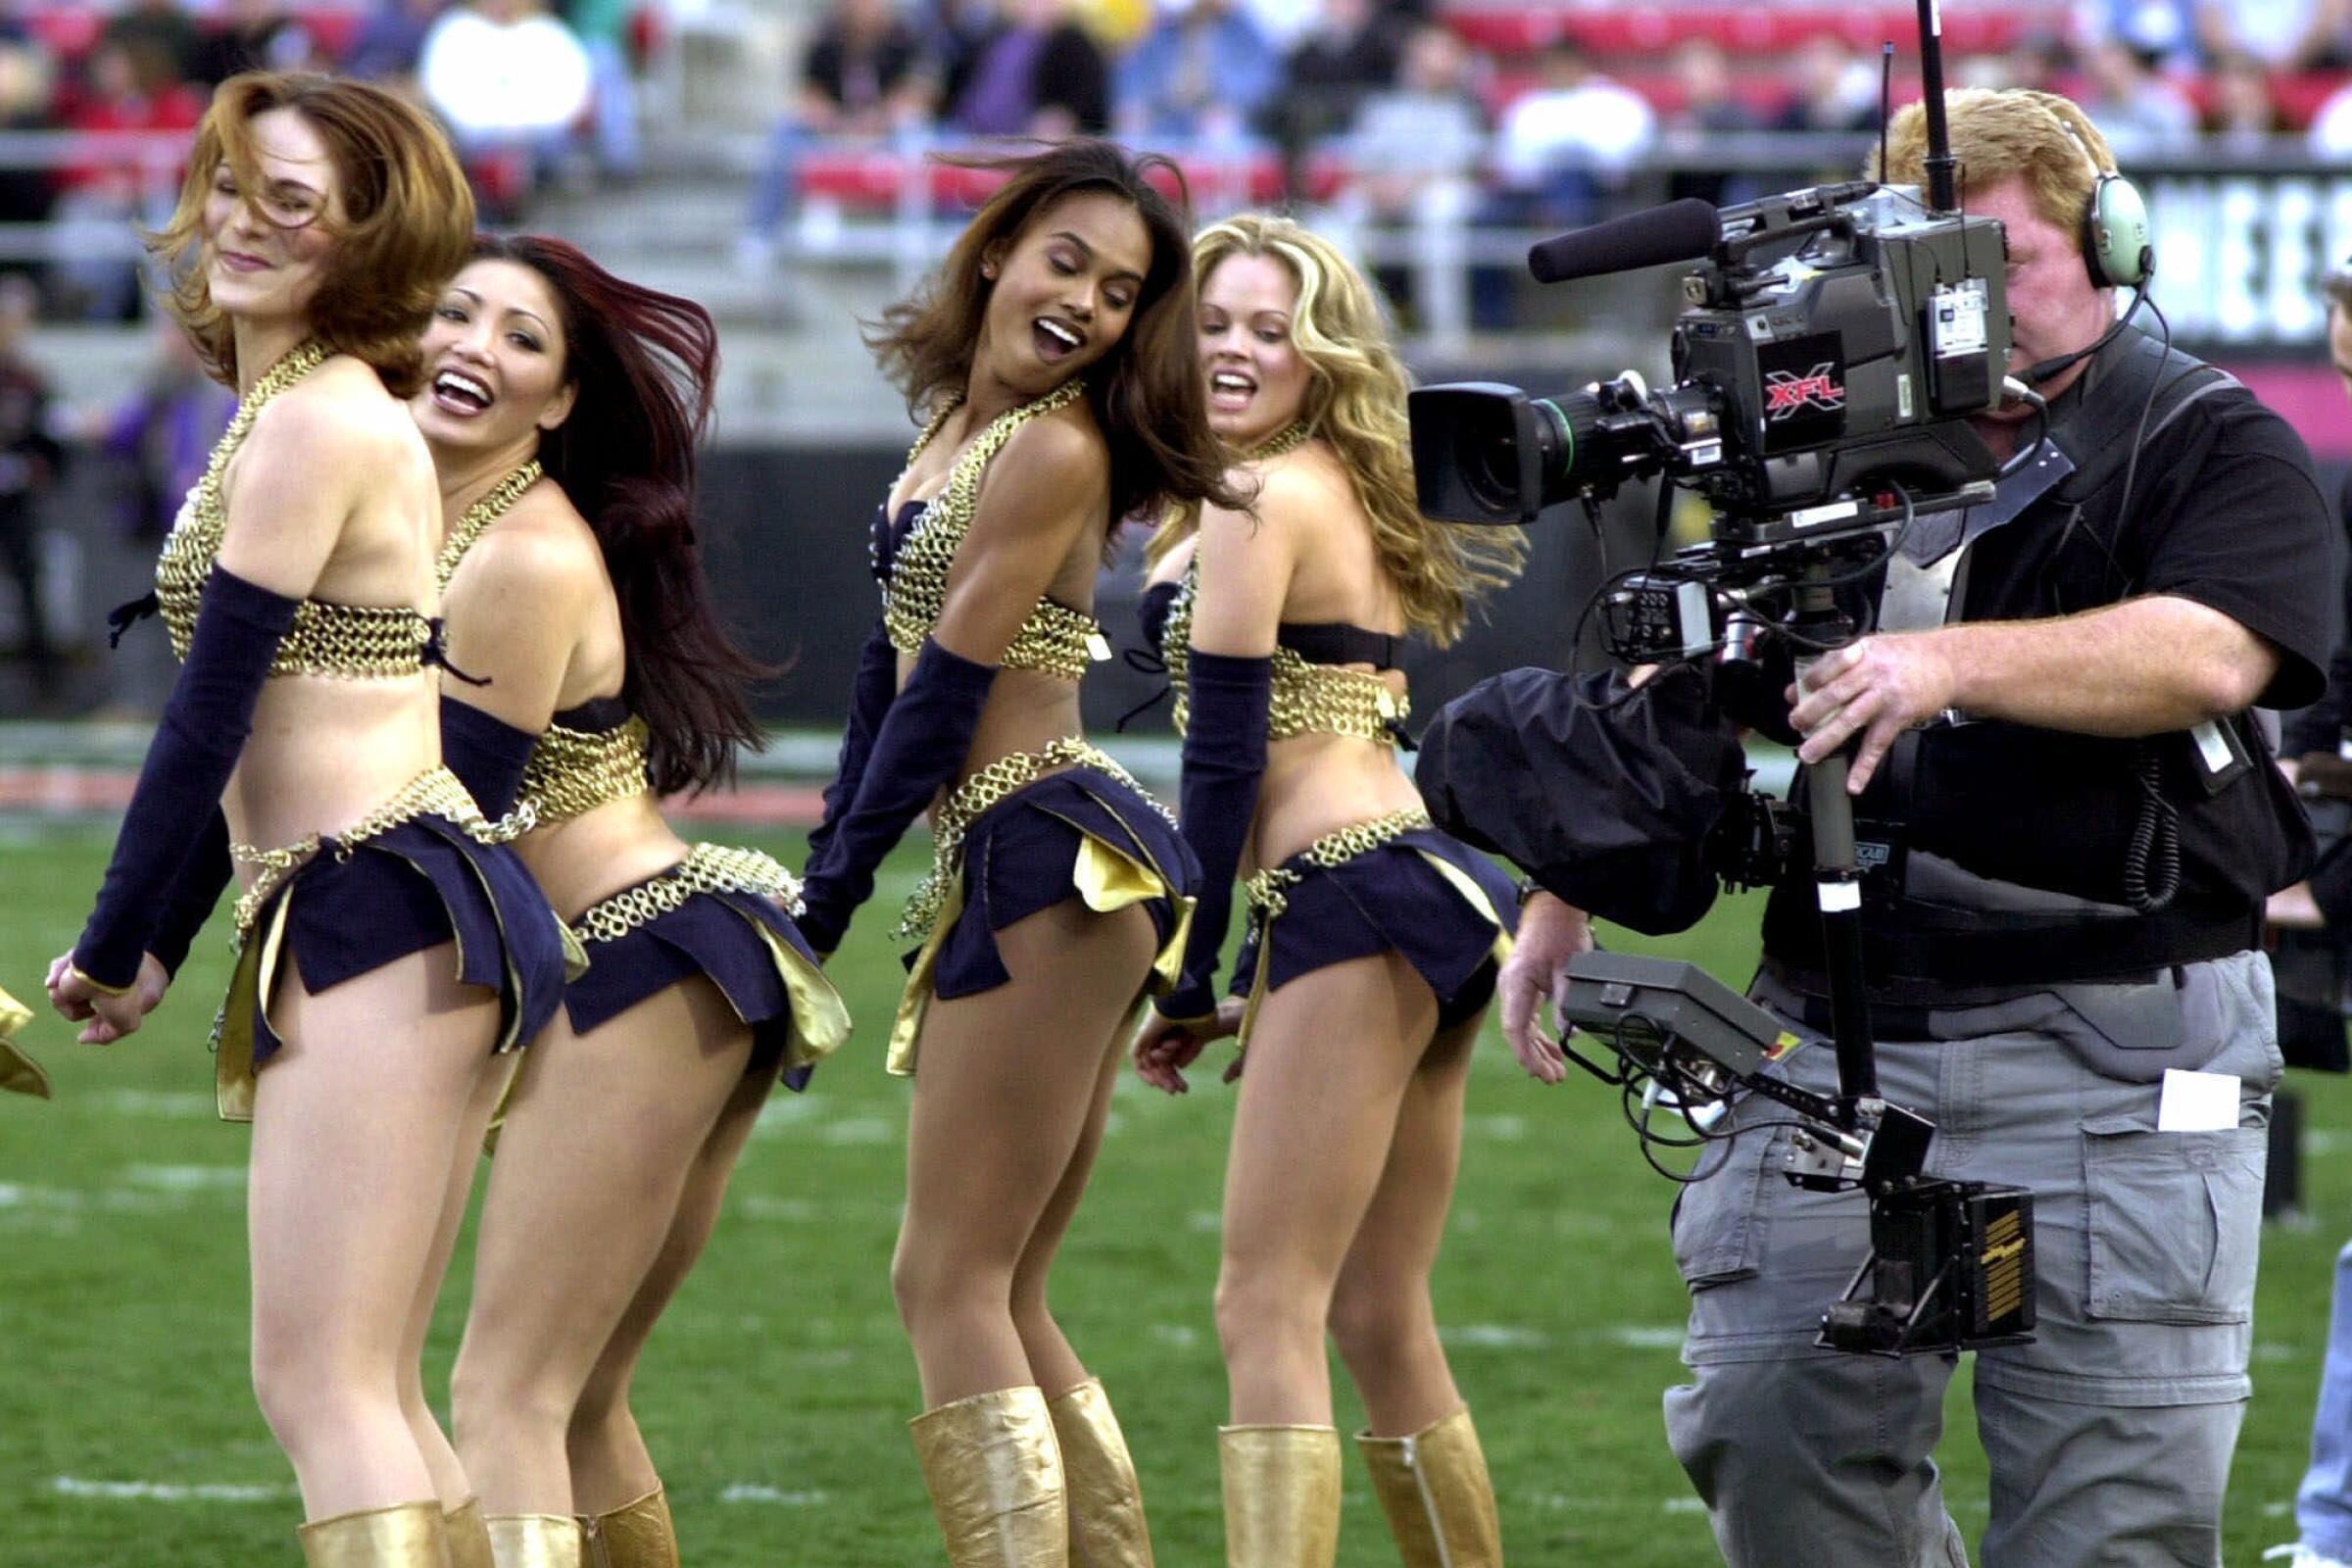 A television cameraman photographs the Los Angeles Xtreme cheerleaders before an XFL game in 2001.